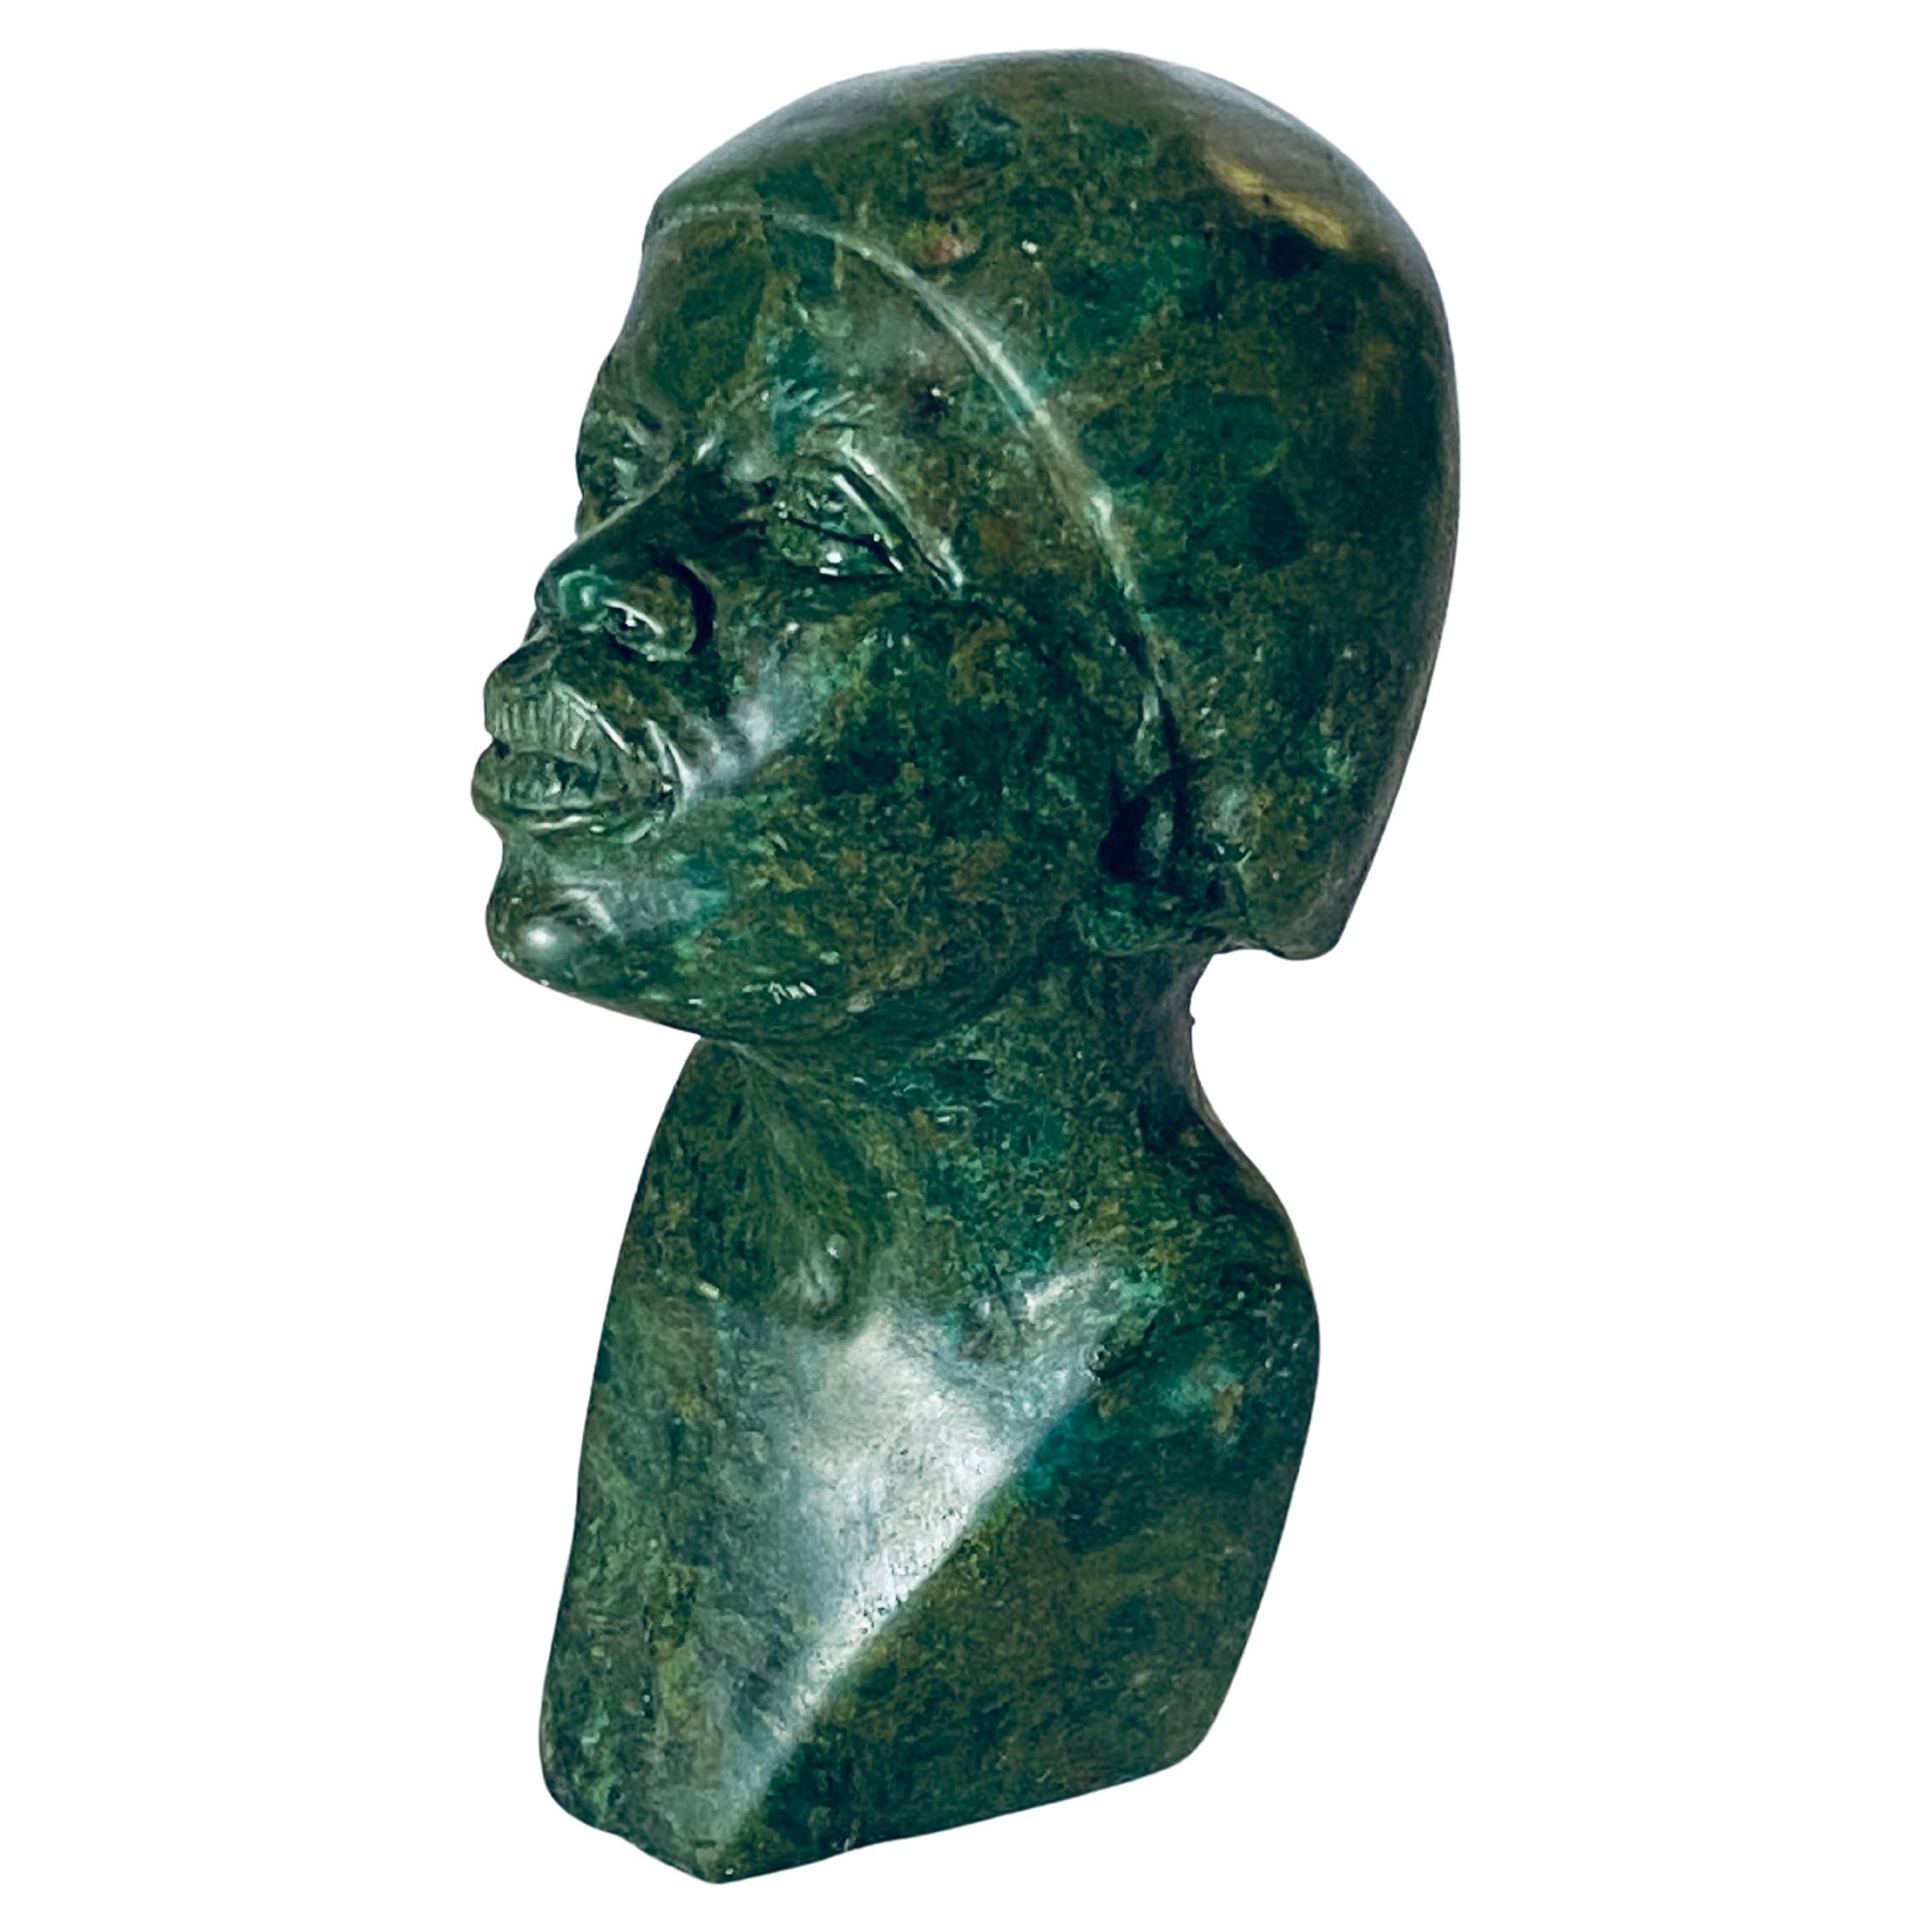 Solid Carved Malchite Head Sculpture or Paperweight